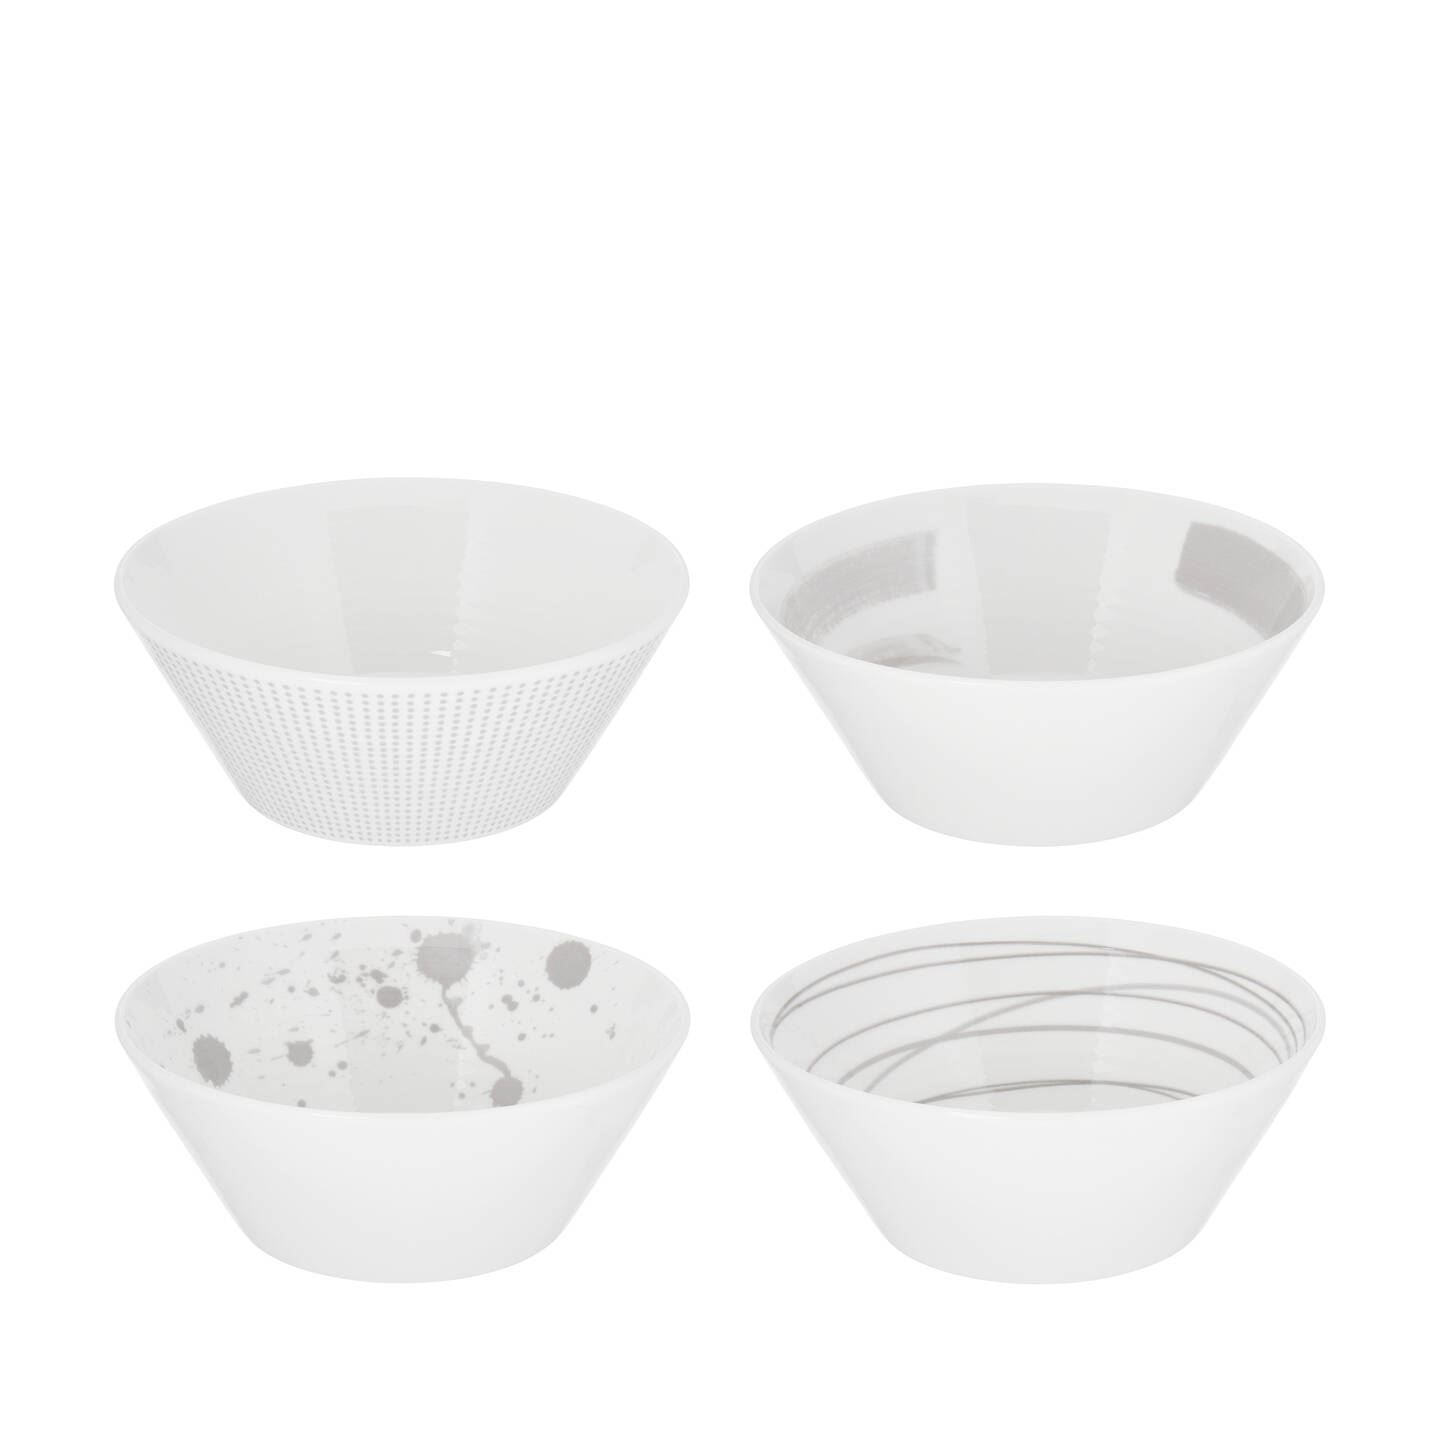 Royal Doulton Pacific Stone Cereal Bowl (Set of 4)